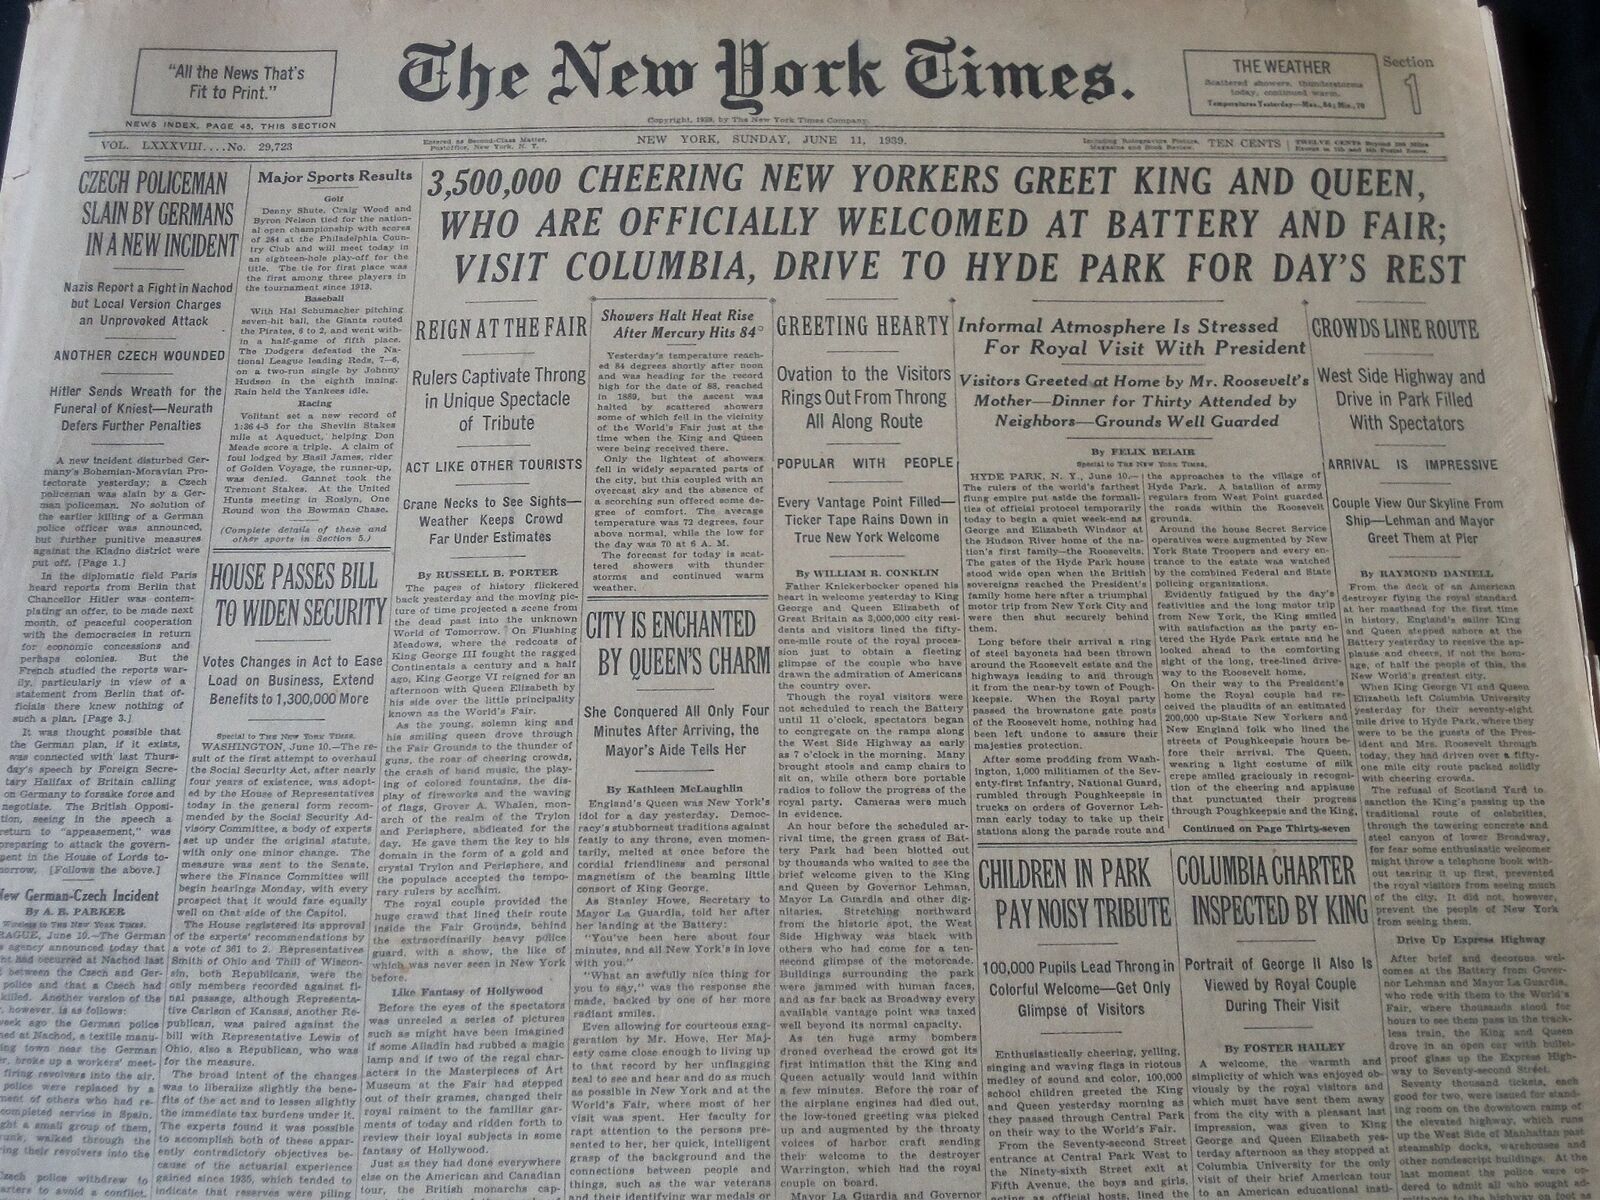 1939 JUNE 11 NEW YORK TIMES - 3.5 MILLION NEW YORKERS GREET KING QUEEN - NT 7281